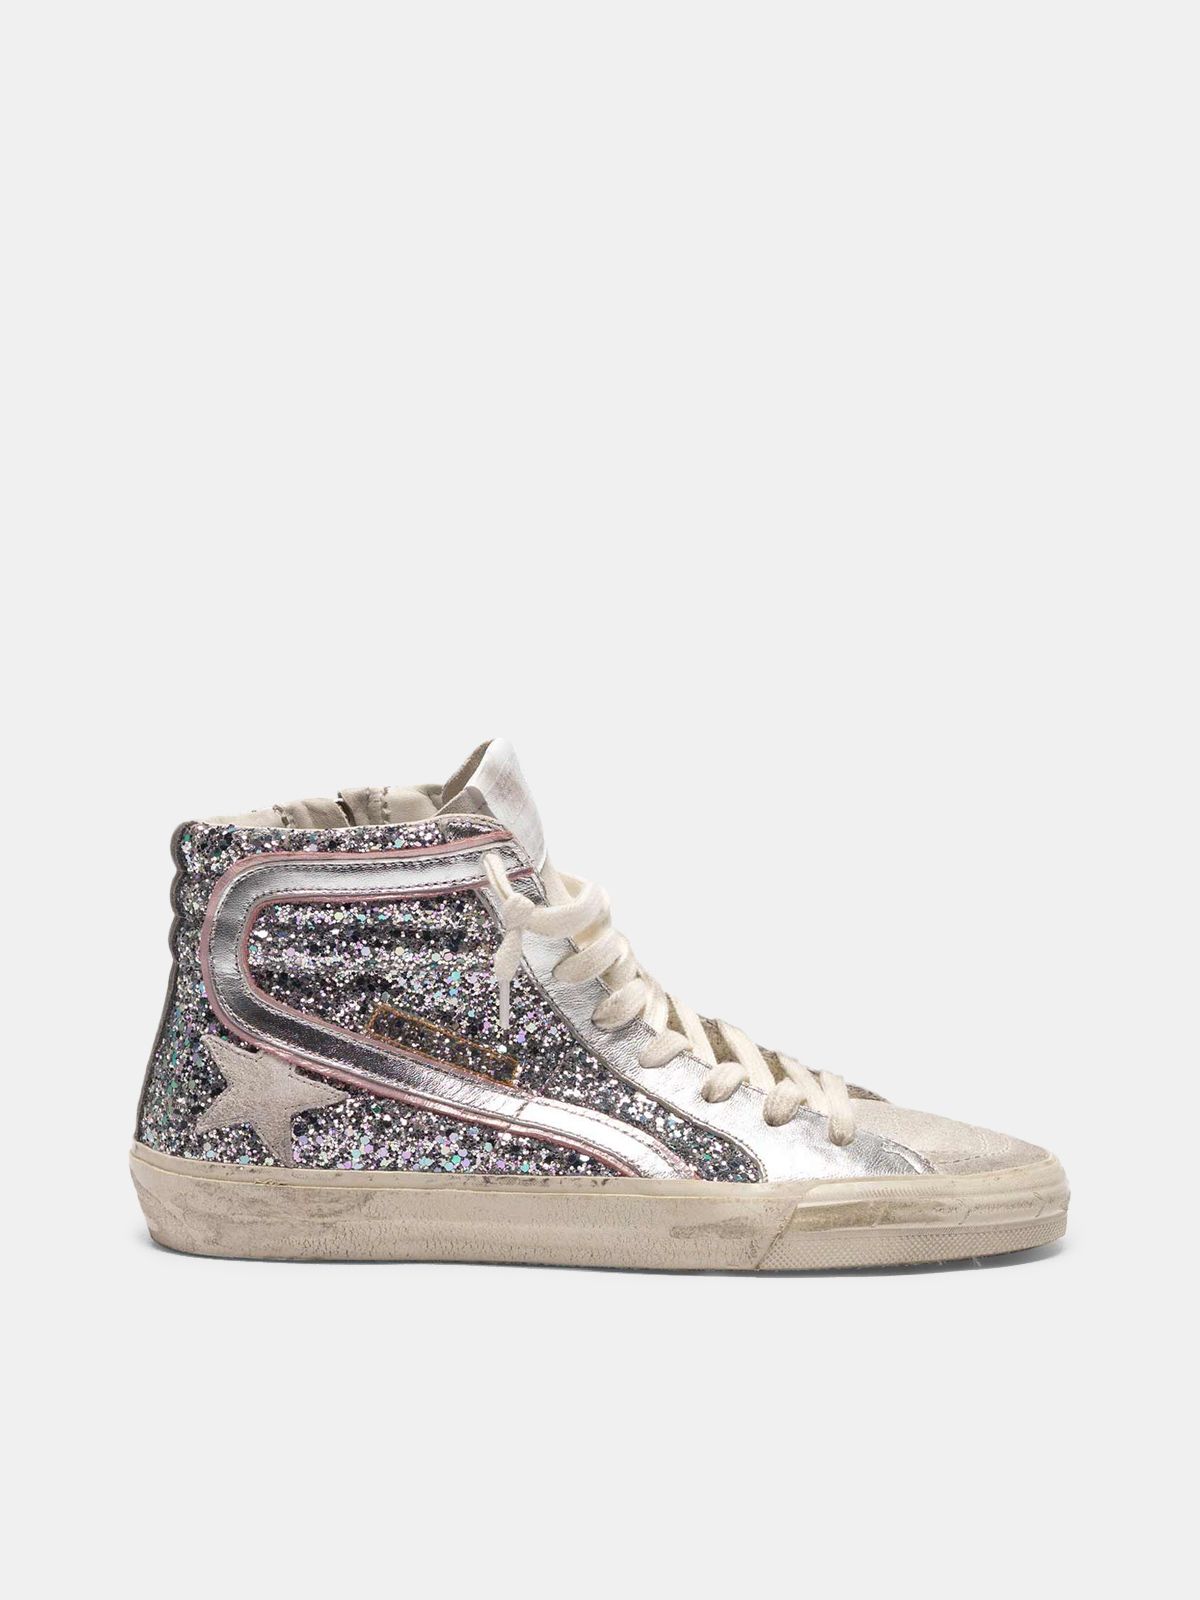 Slide sneakers in silver laminated leather and glitter | 